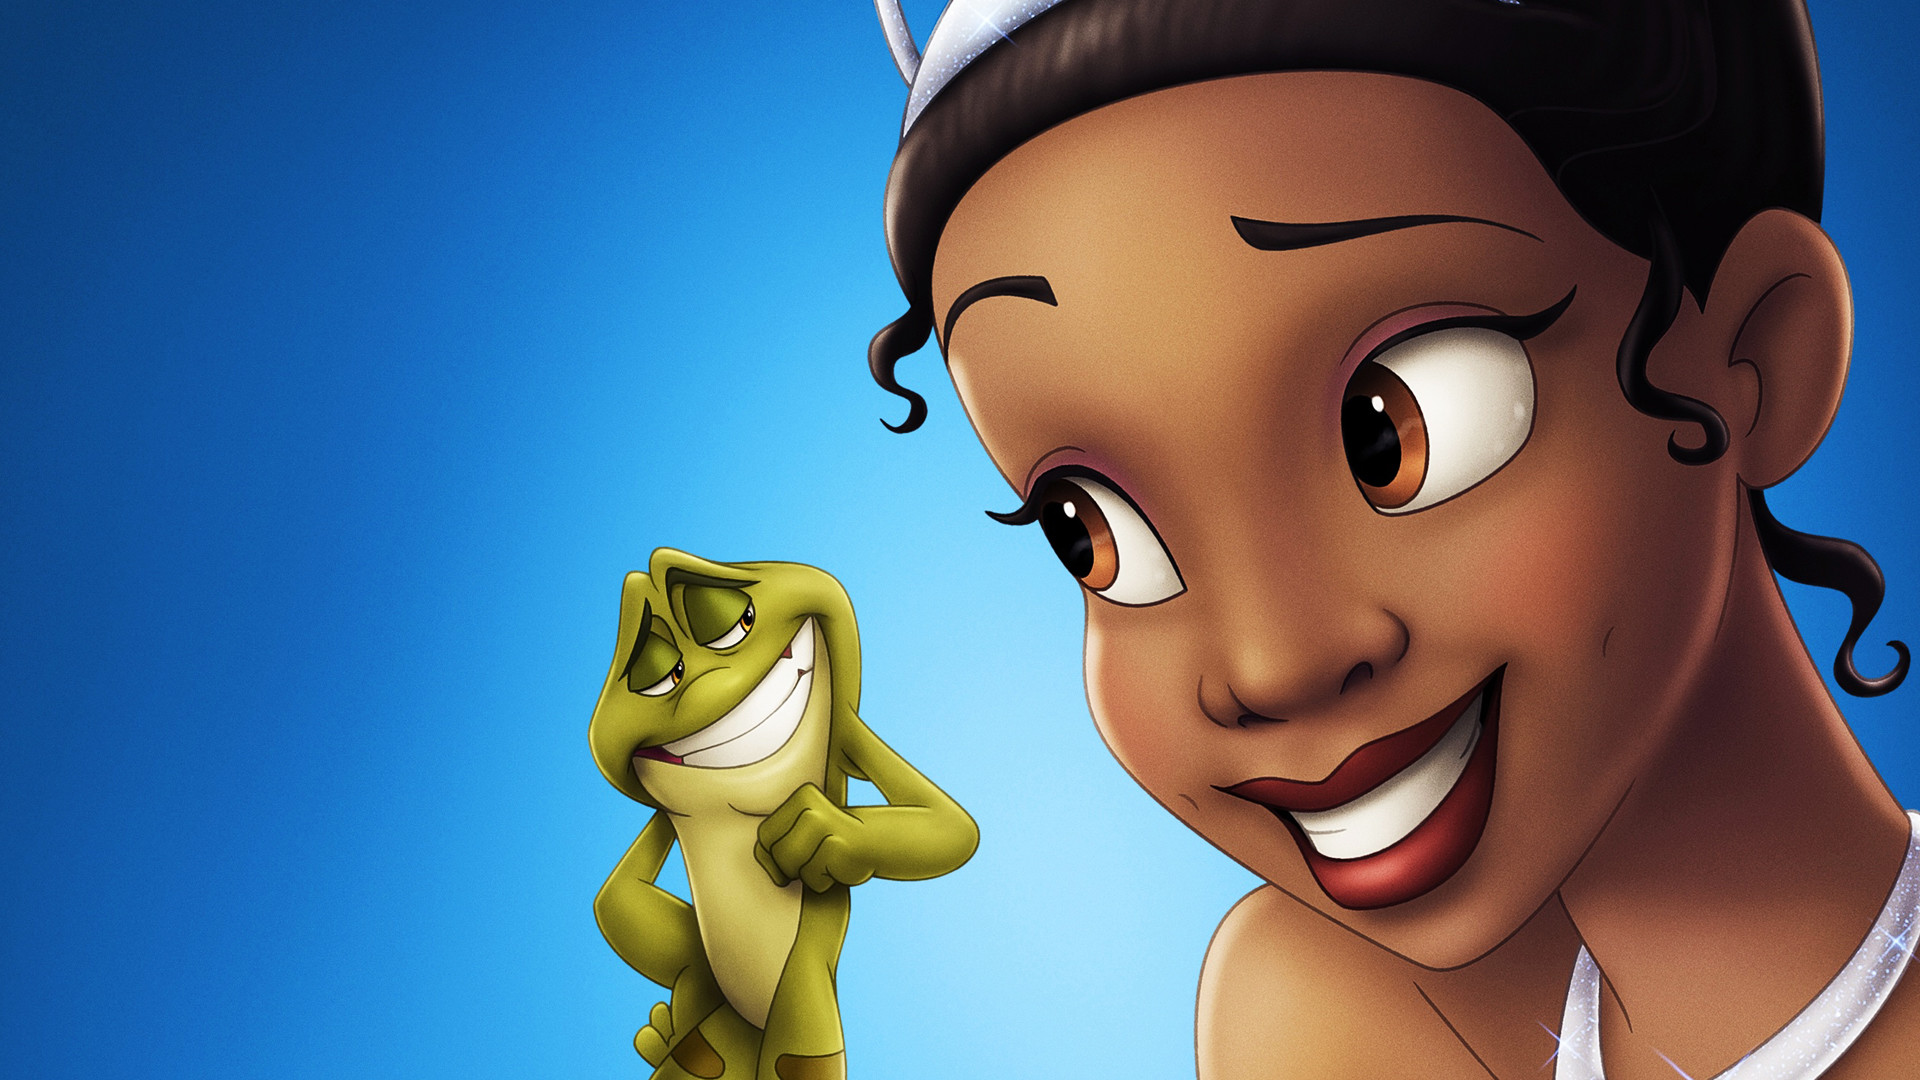 1920x1080 The Princess And The Frog